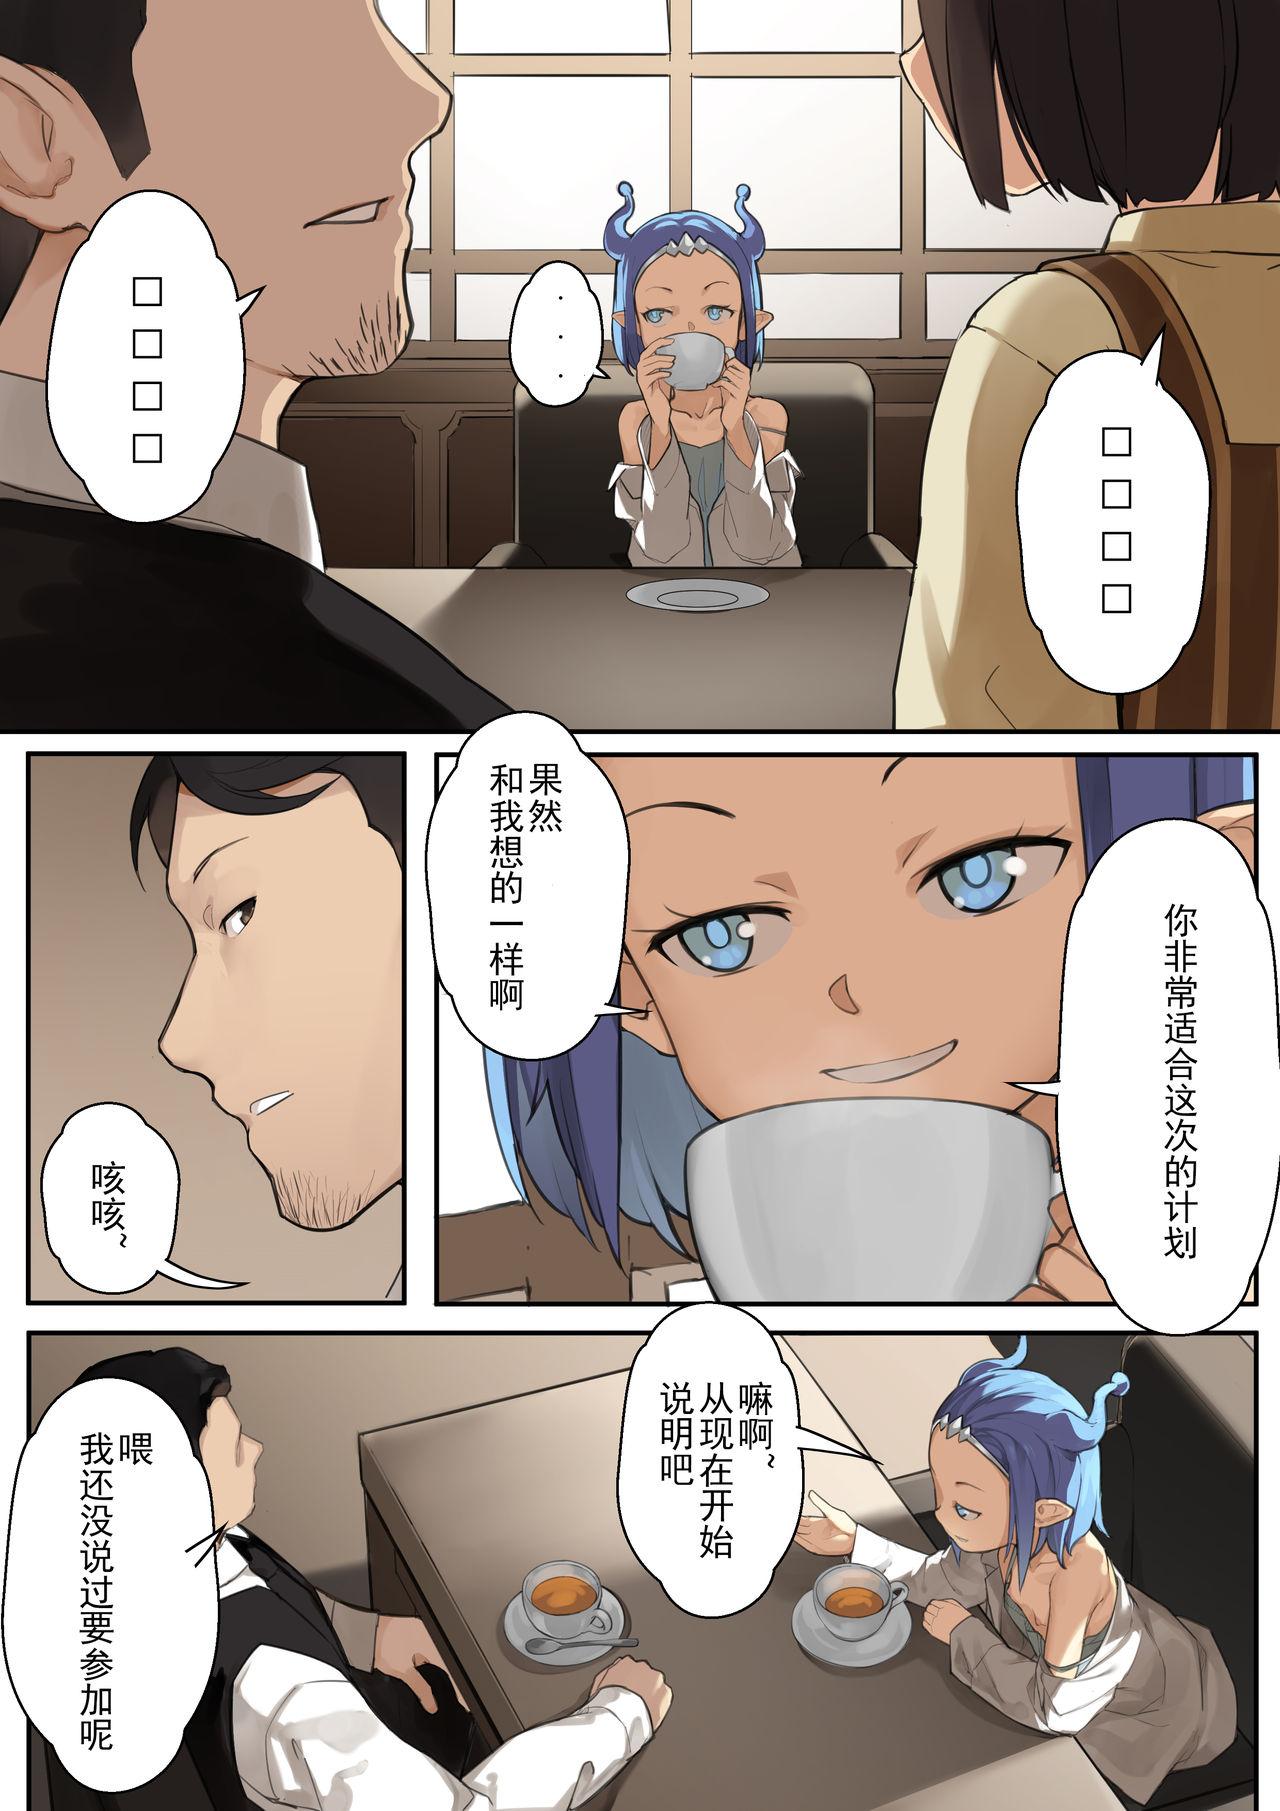 From (同人誌) [BLVEFO9] 乙女の特異性 - 第03話 (オリジナル)[Chinese]【不可视汉化】 - Original Picked Up - Page 5